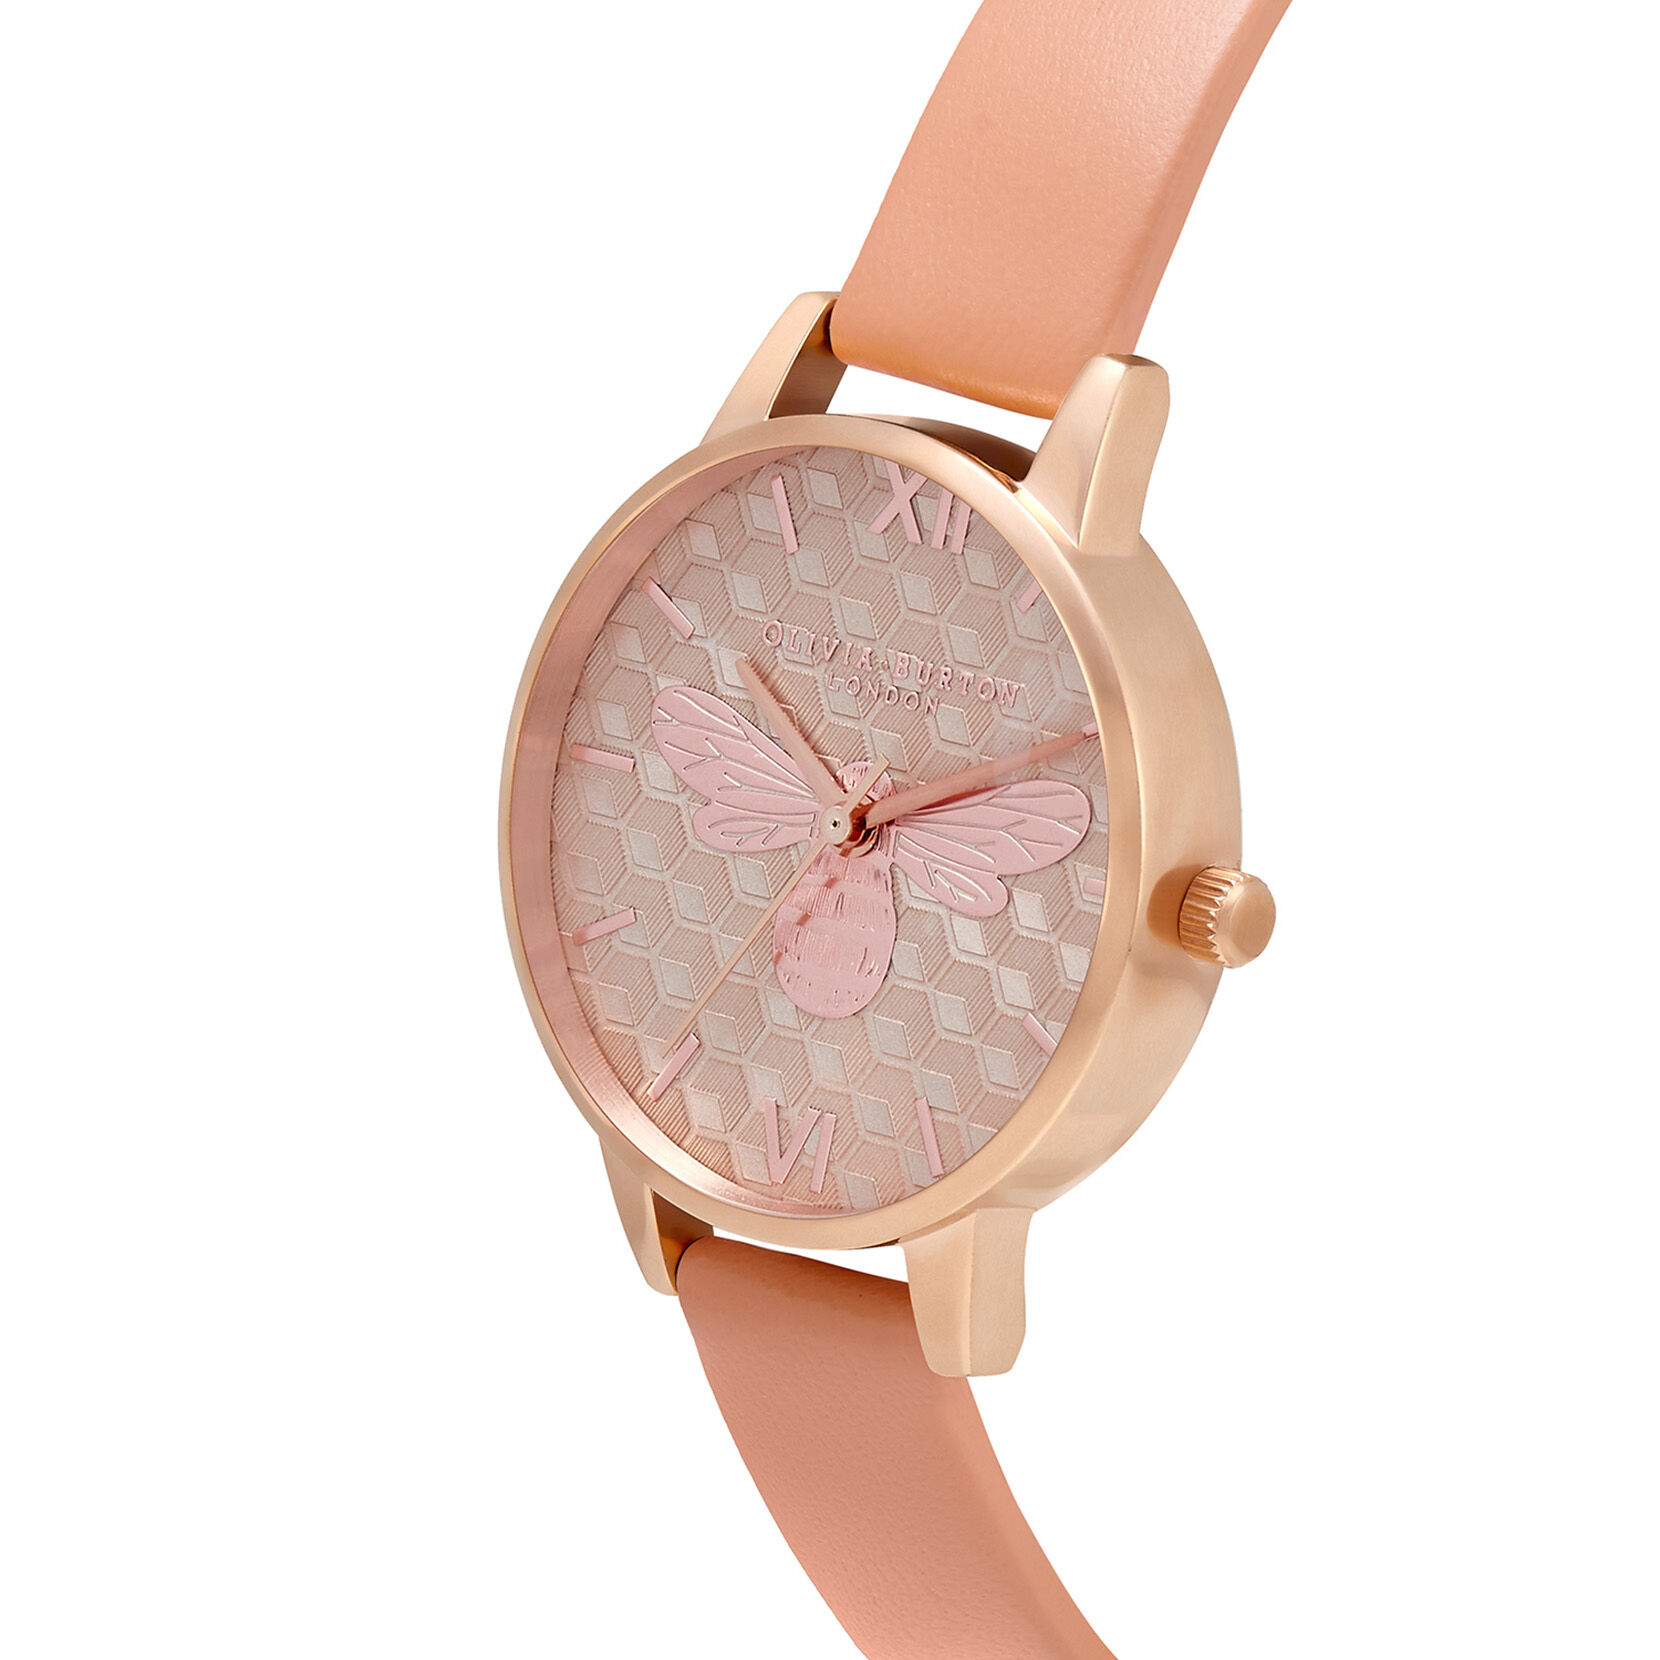 Honey Bee 30mm Rose Gold & Tan Leather Strap Watch